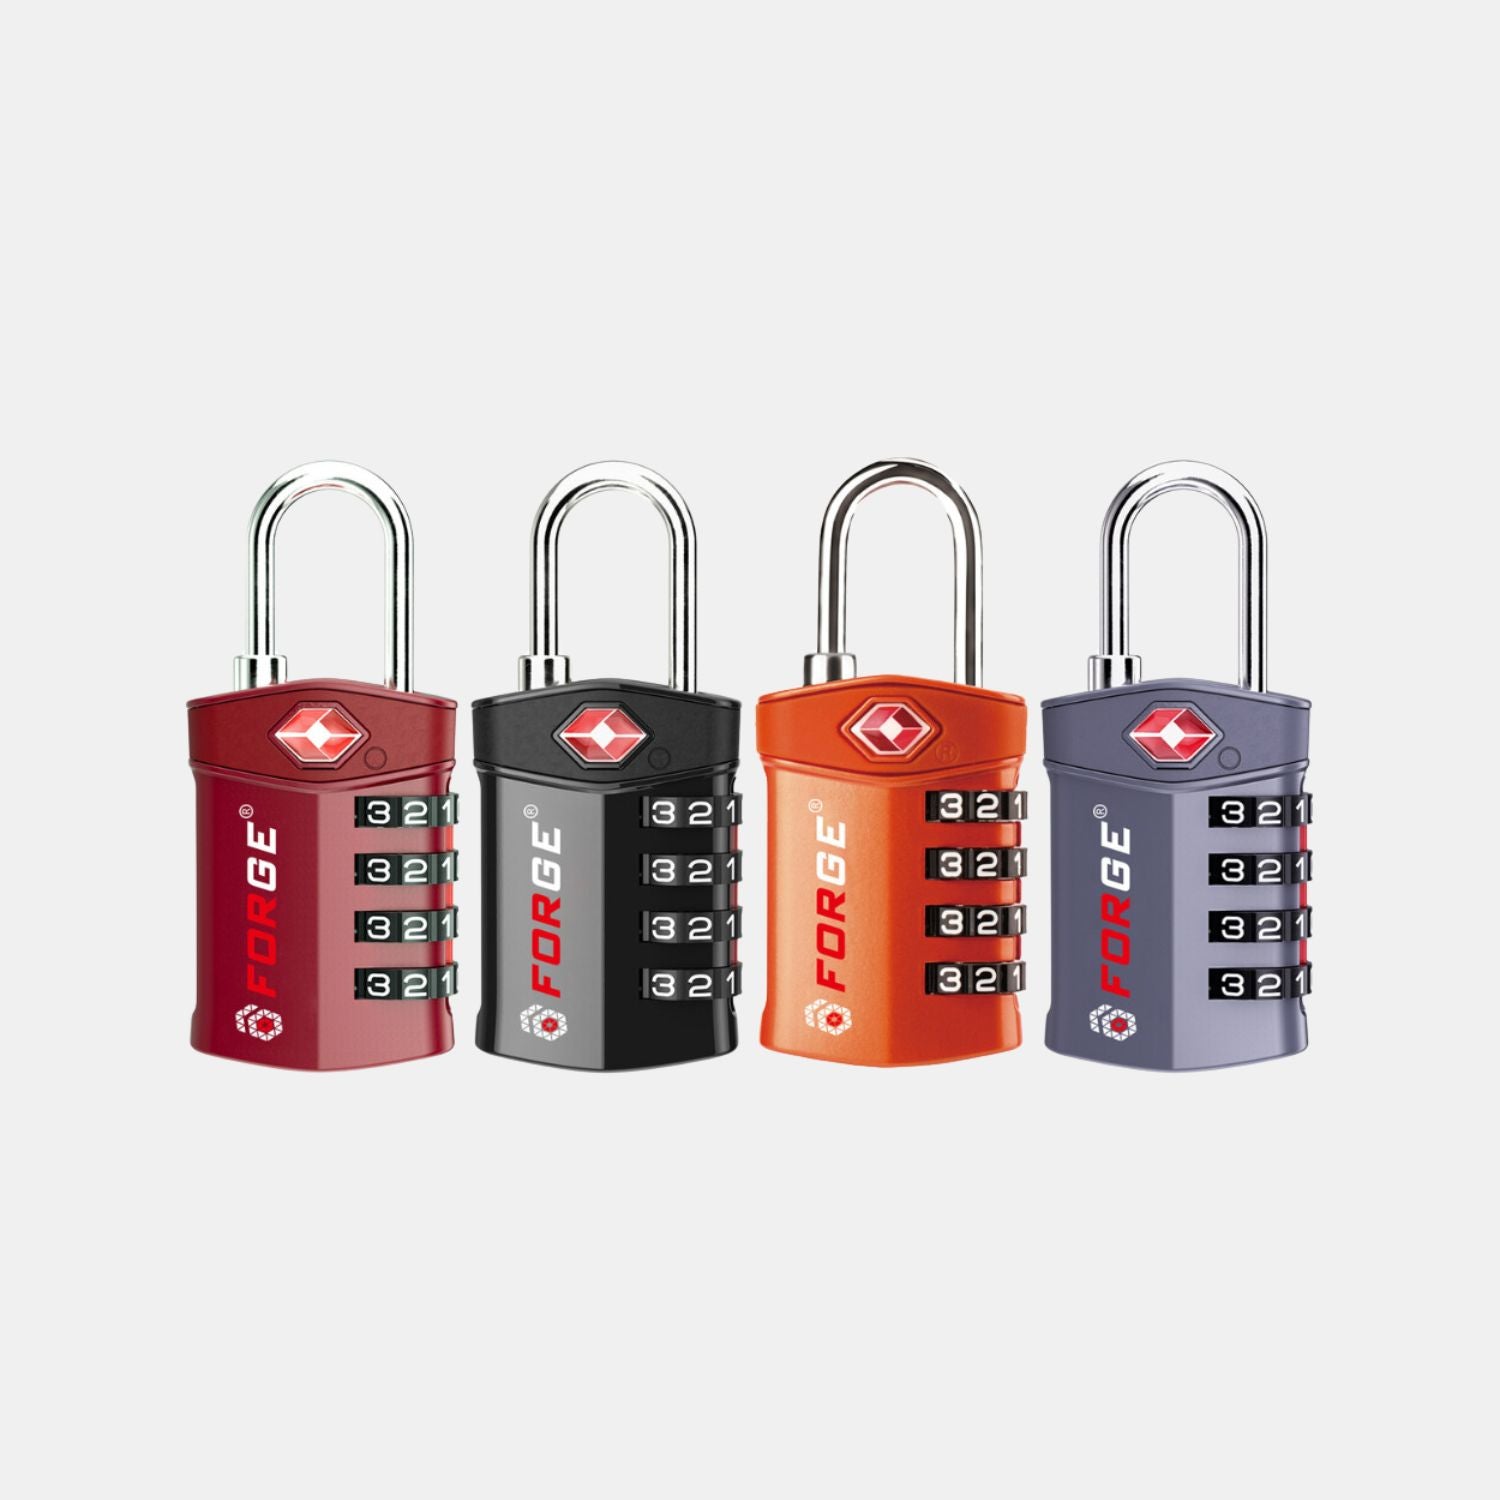 TSA Approved 4-Digit Combination Locks for Luggage and Suitcases. Open Alert, Alloy Body